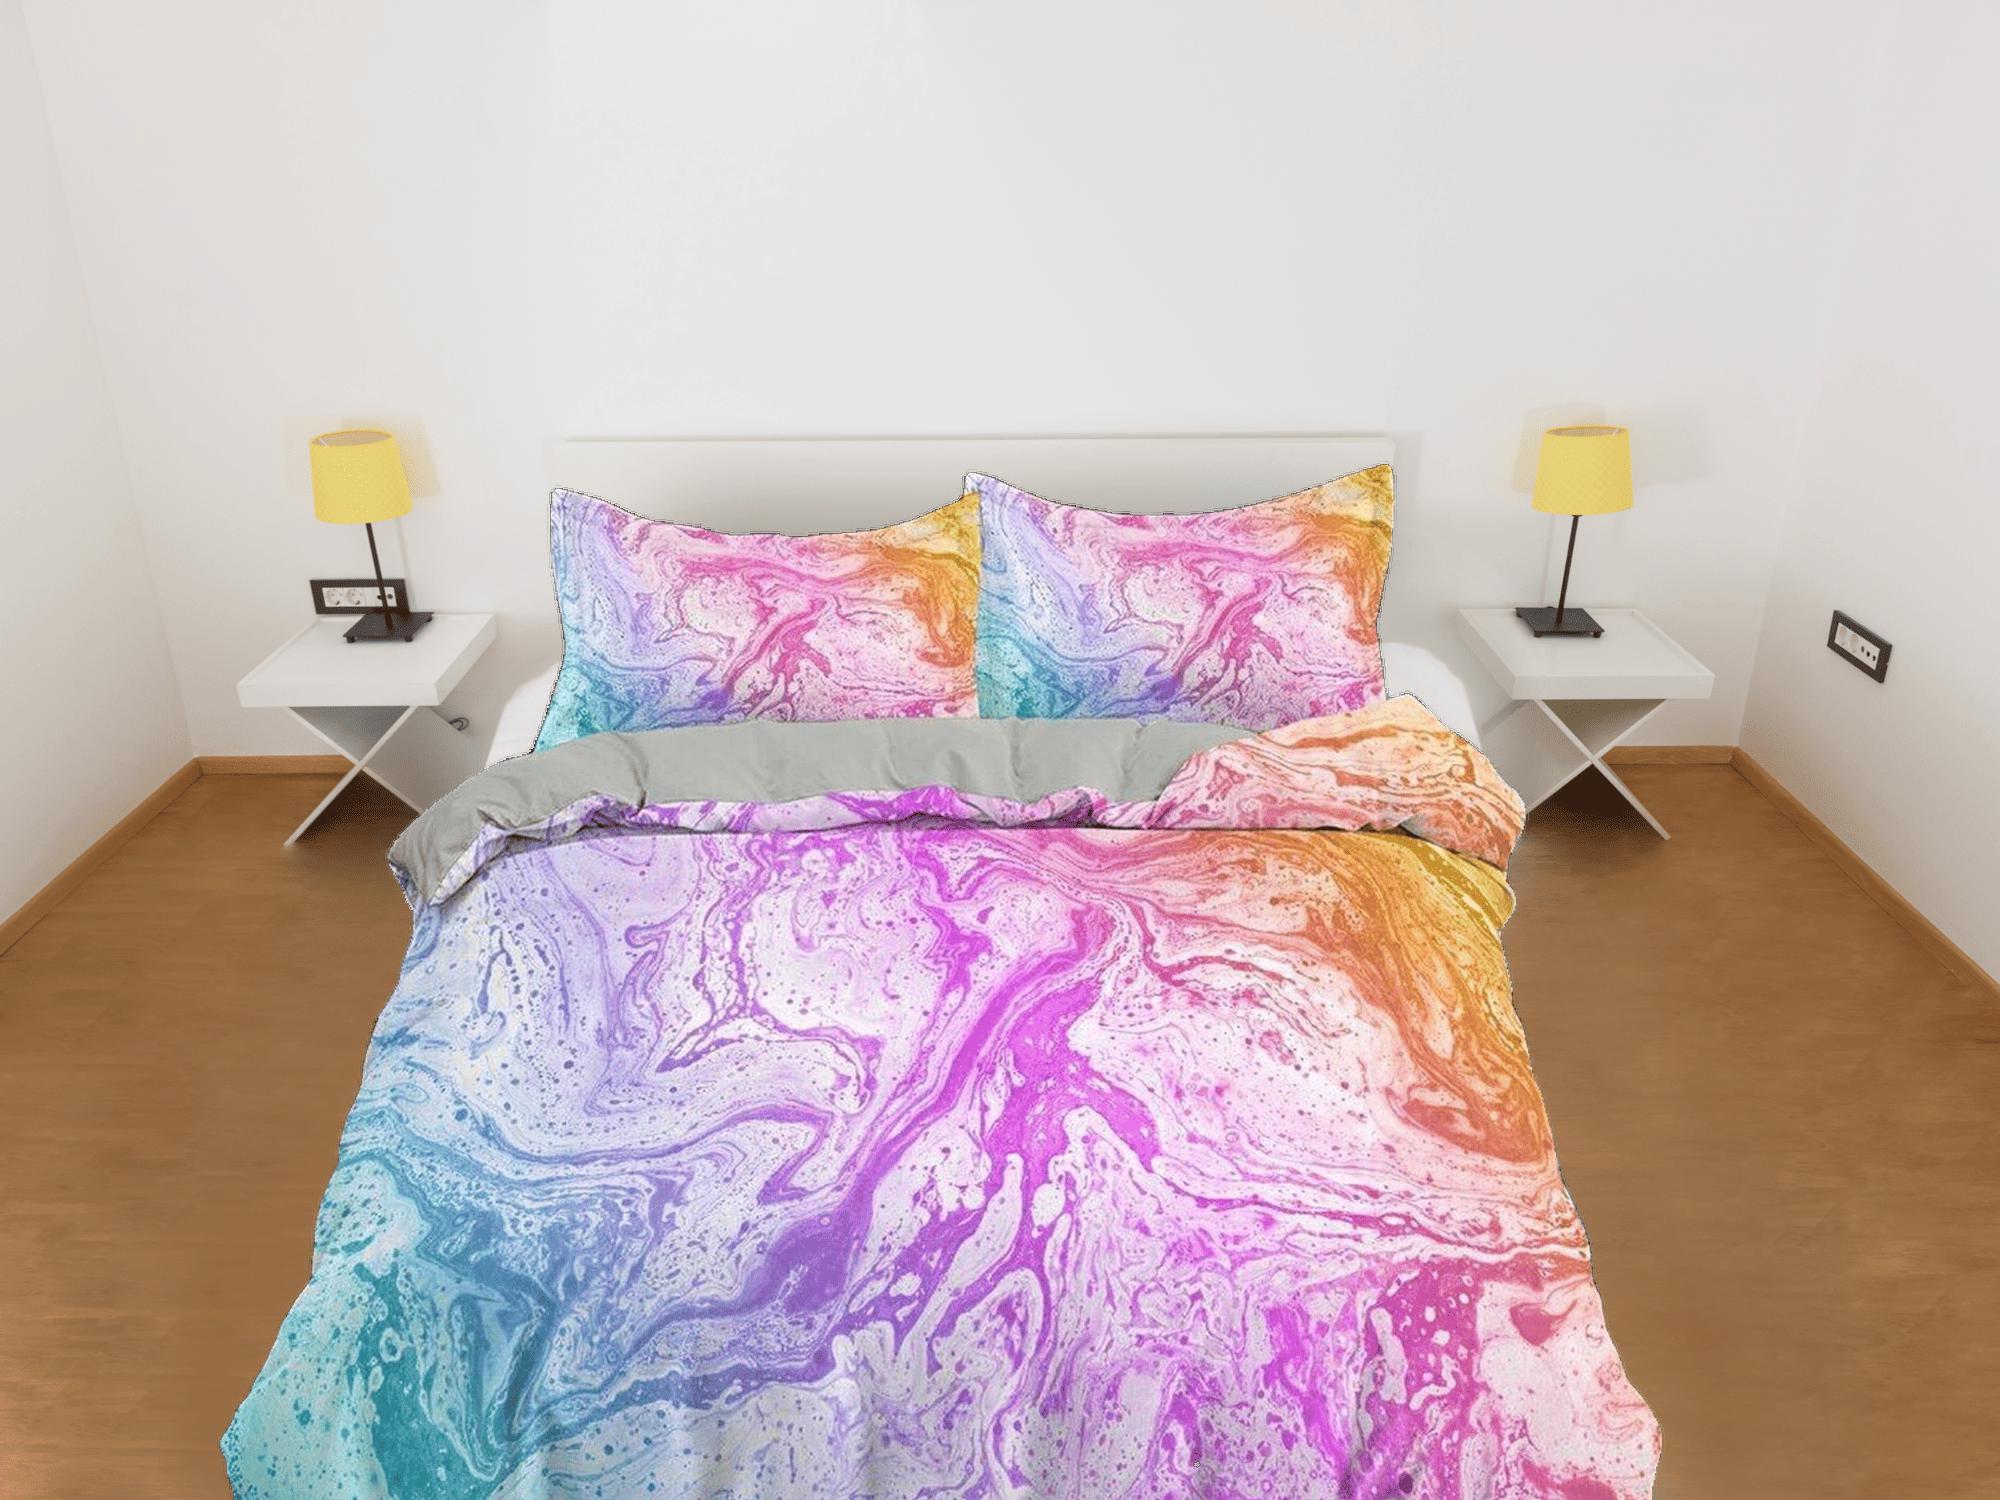 daintyduvet Contemporary bedroom set unicorn colors aesthetic duvet cover, alcohol ink abstract art room decor boho chic bedding set full king queen